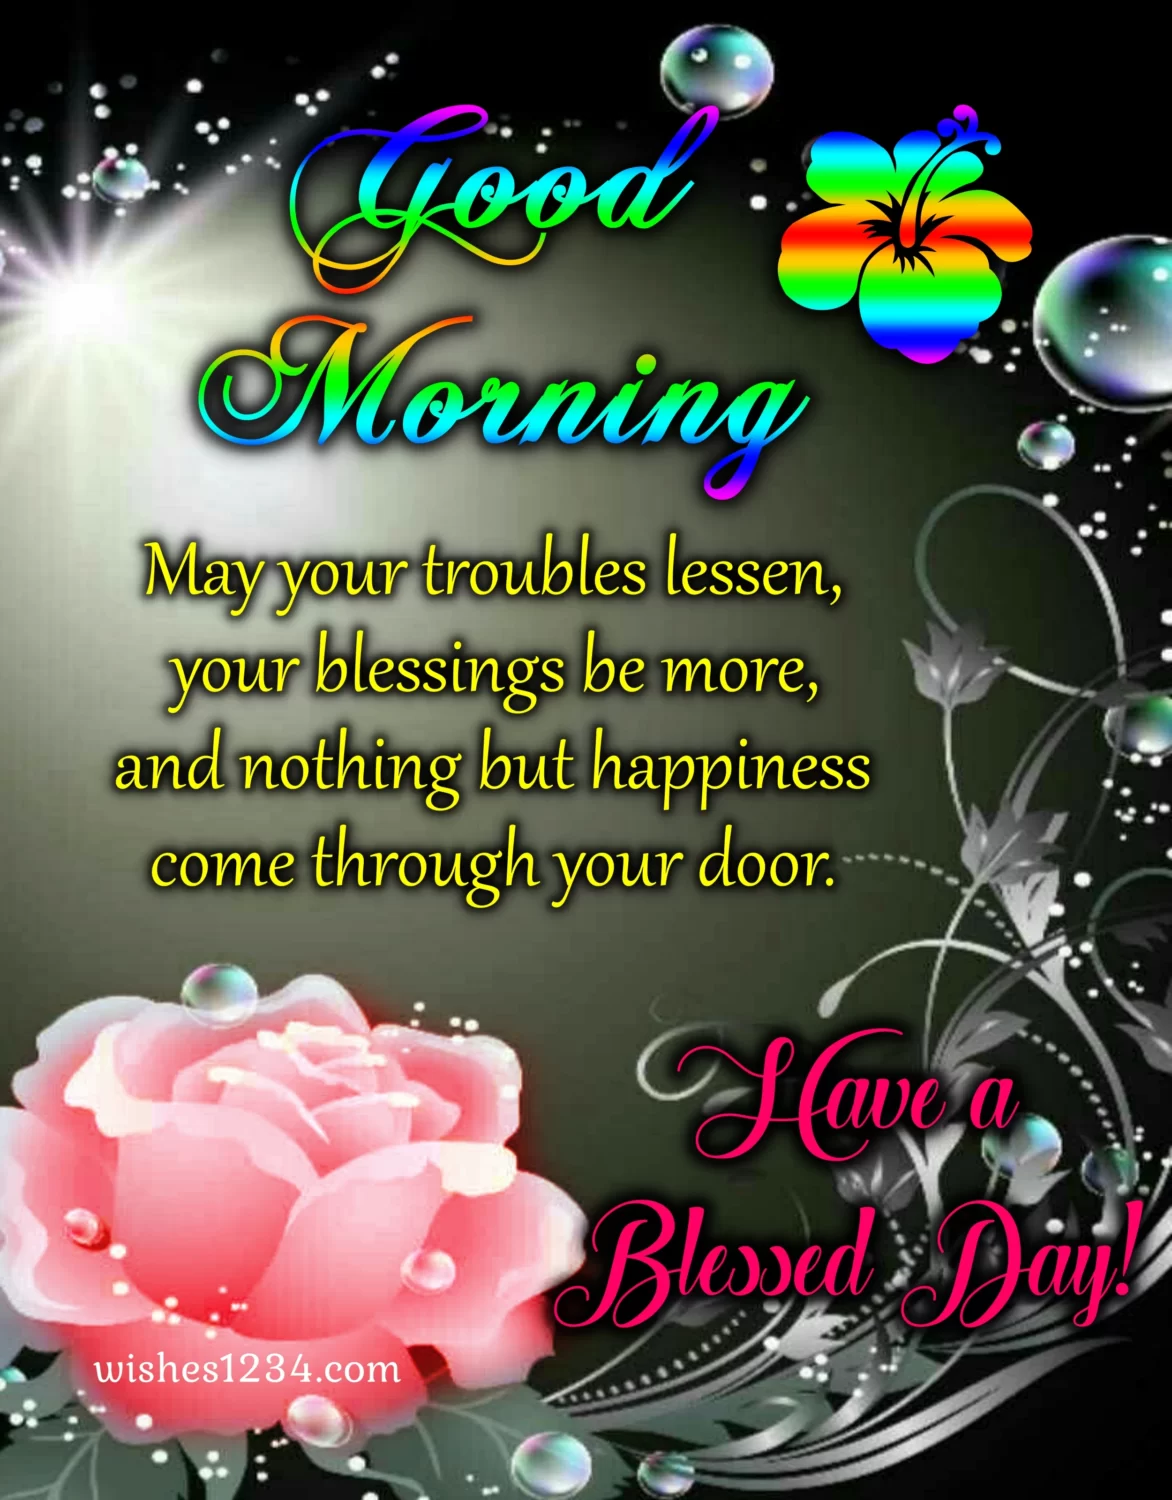 Morning blessing with pink rose, Good morning images with quotes.